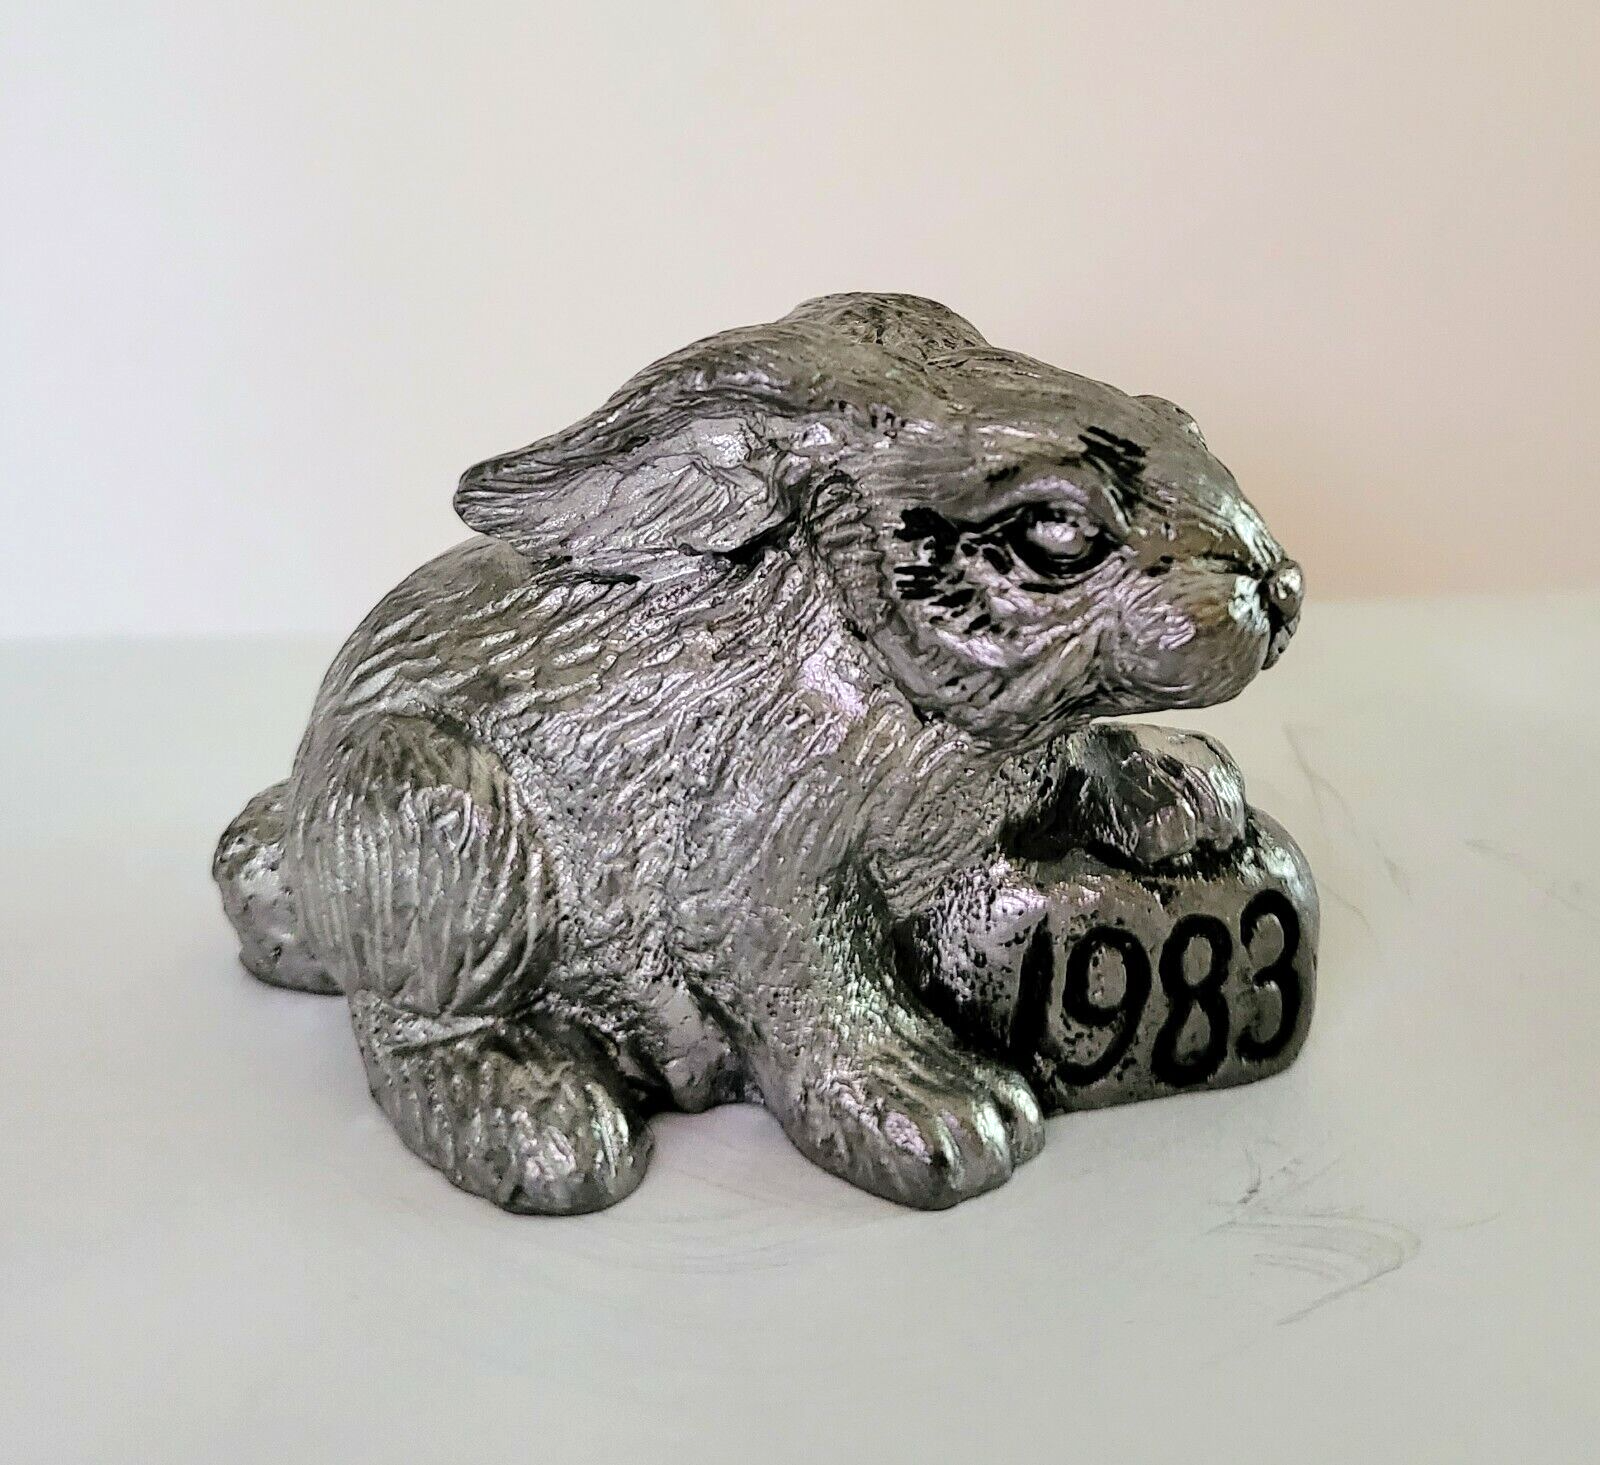 Vintage Michael Ricker Pewter Bunny Rabbit Figurine Dated/Signed Rock 1983 #2977 - $19.99